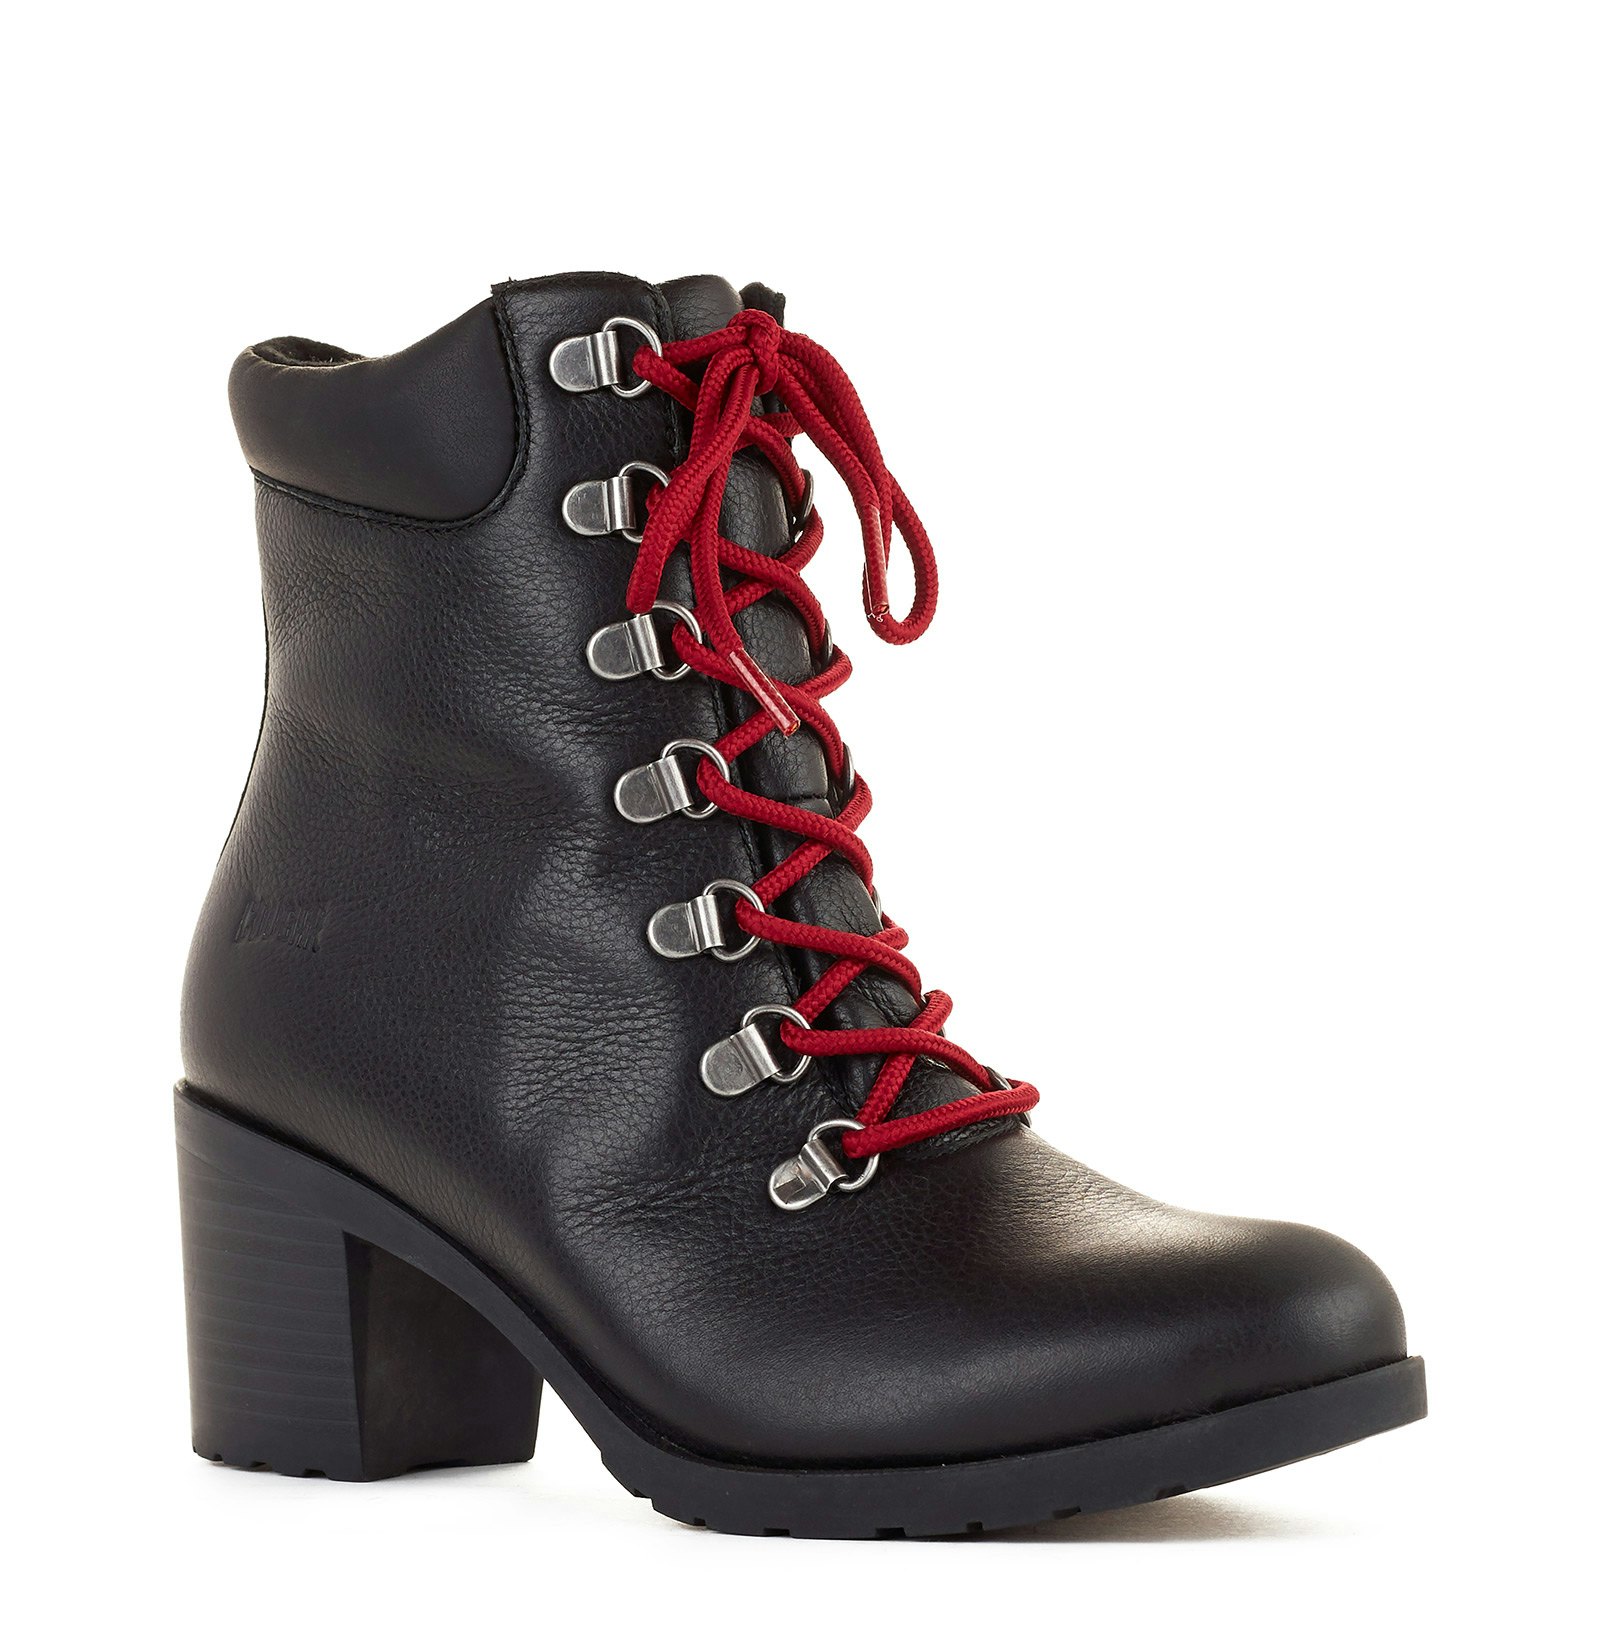 Where To Buy Combat Boots Because It's 